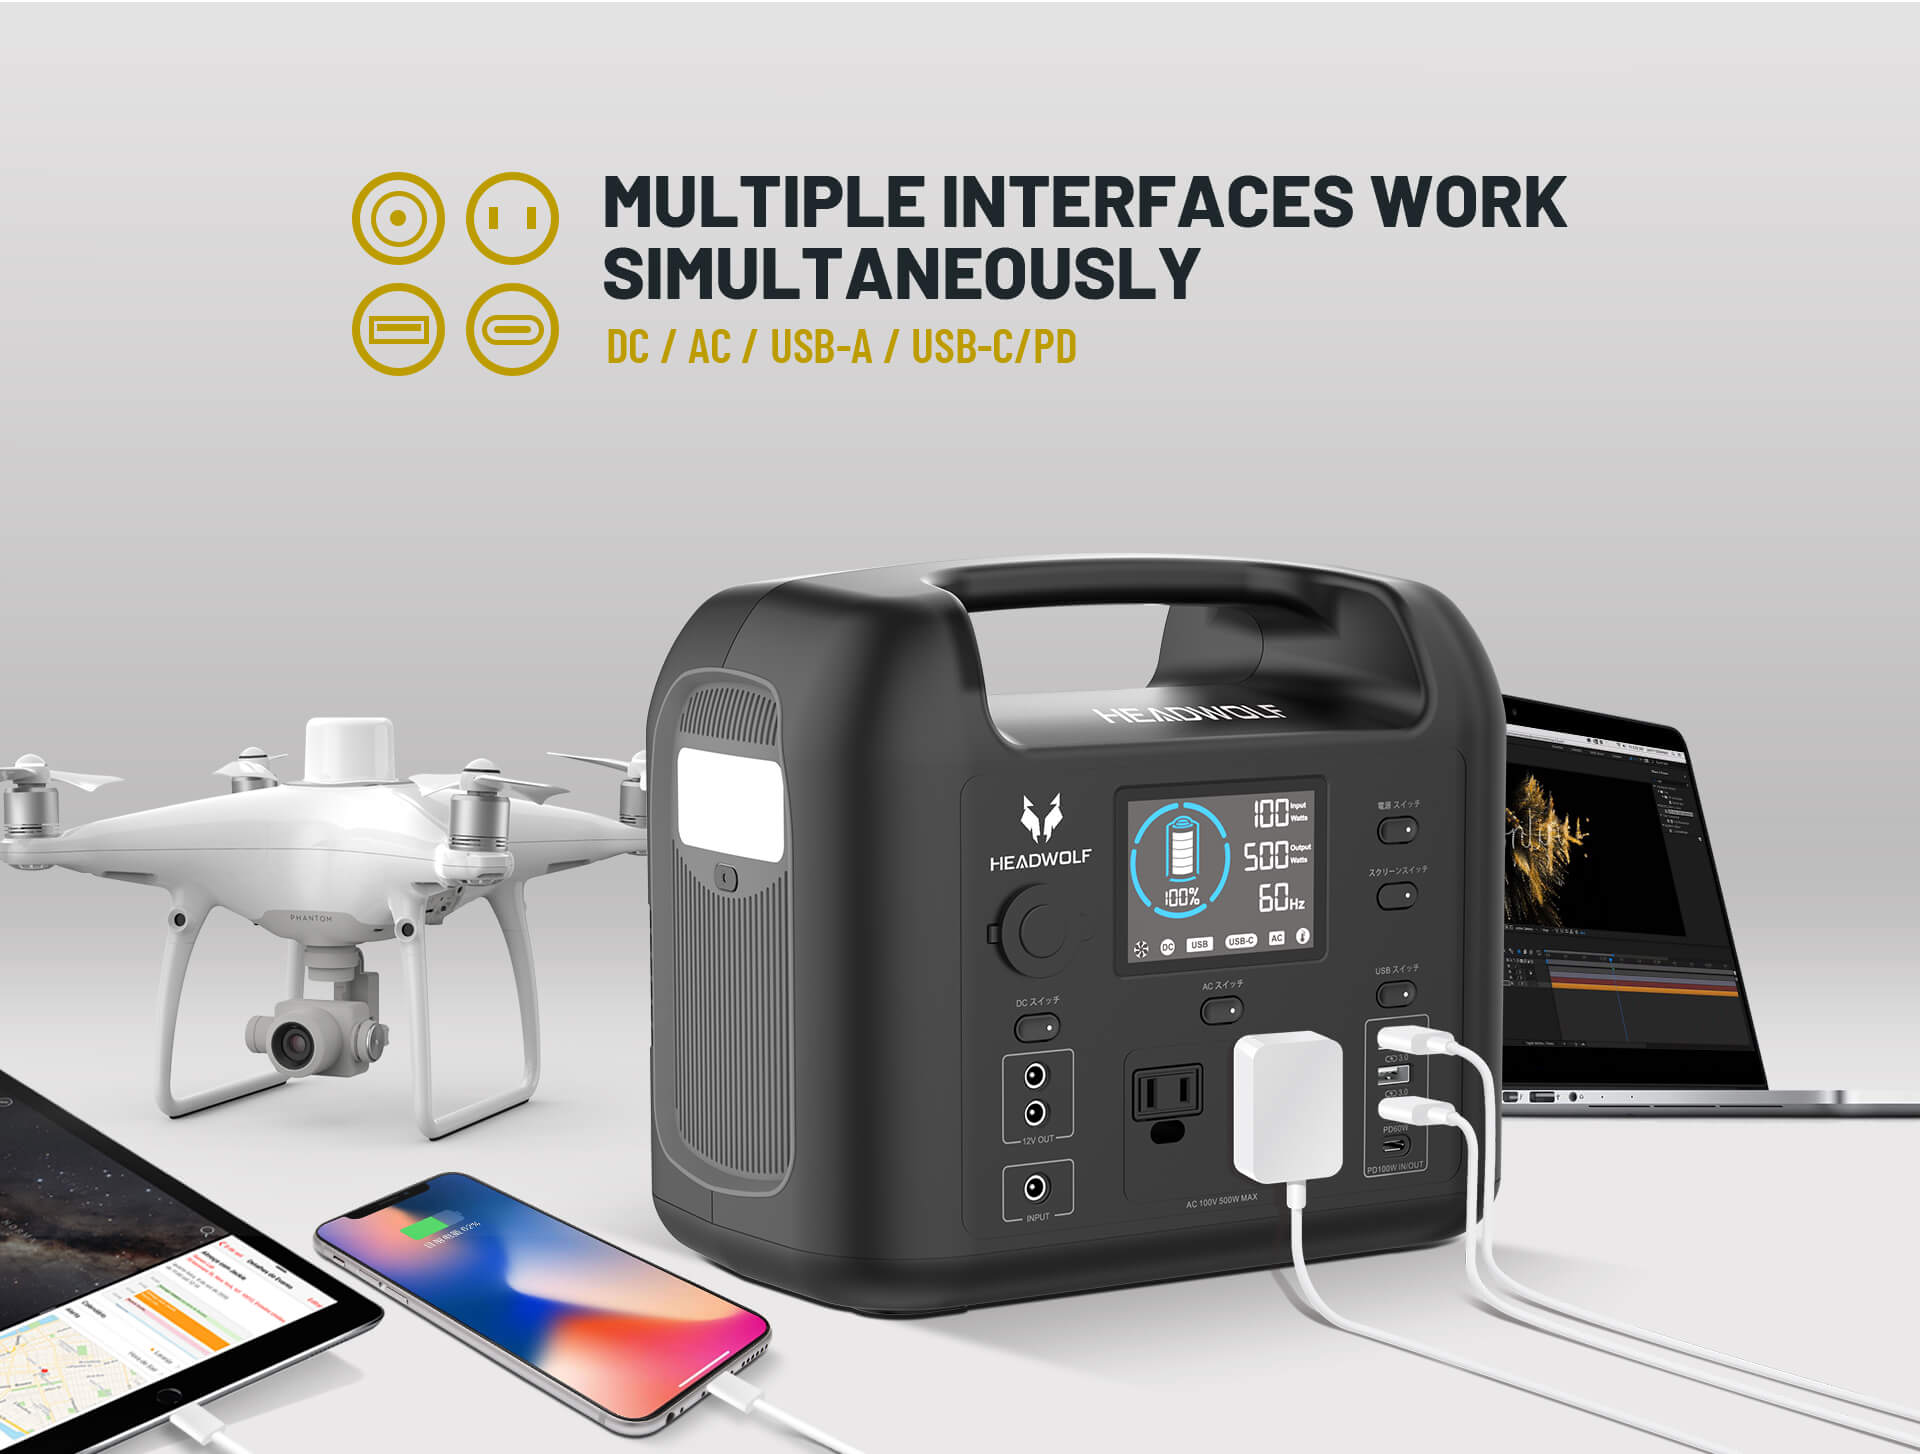 Multiple Interfaces work simultaneously